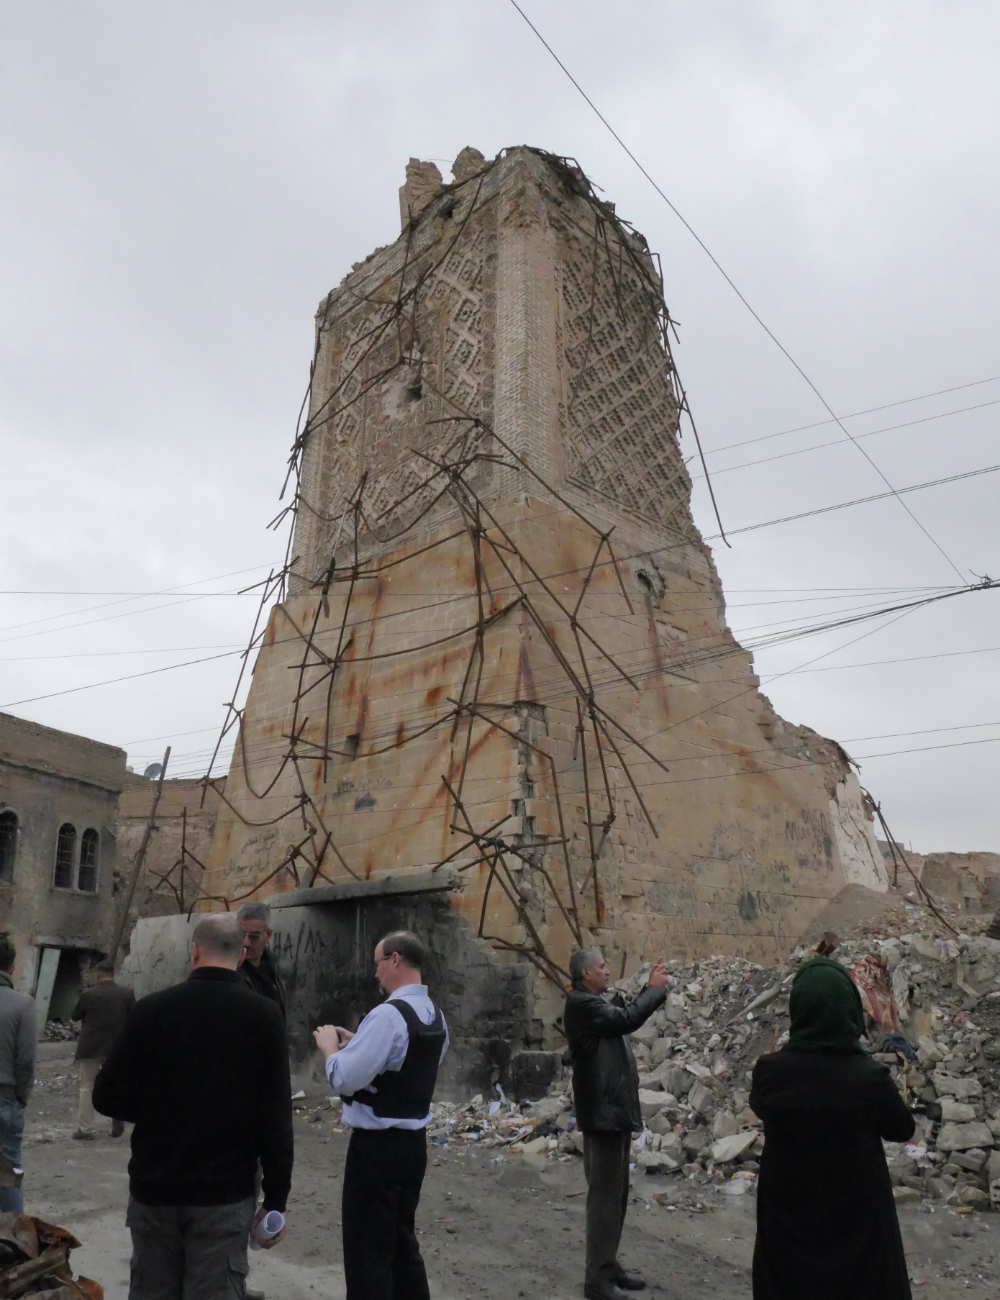 A brown brick minaret destroyed with people in the foreground. 